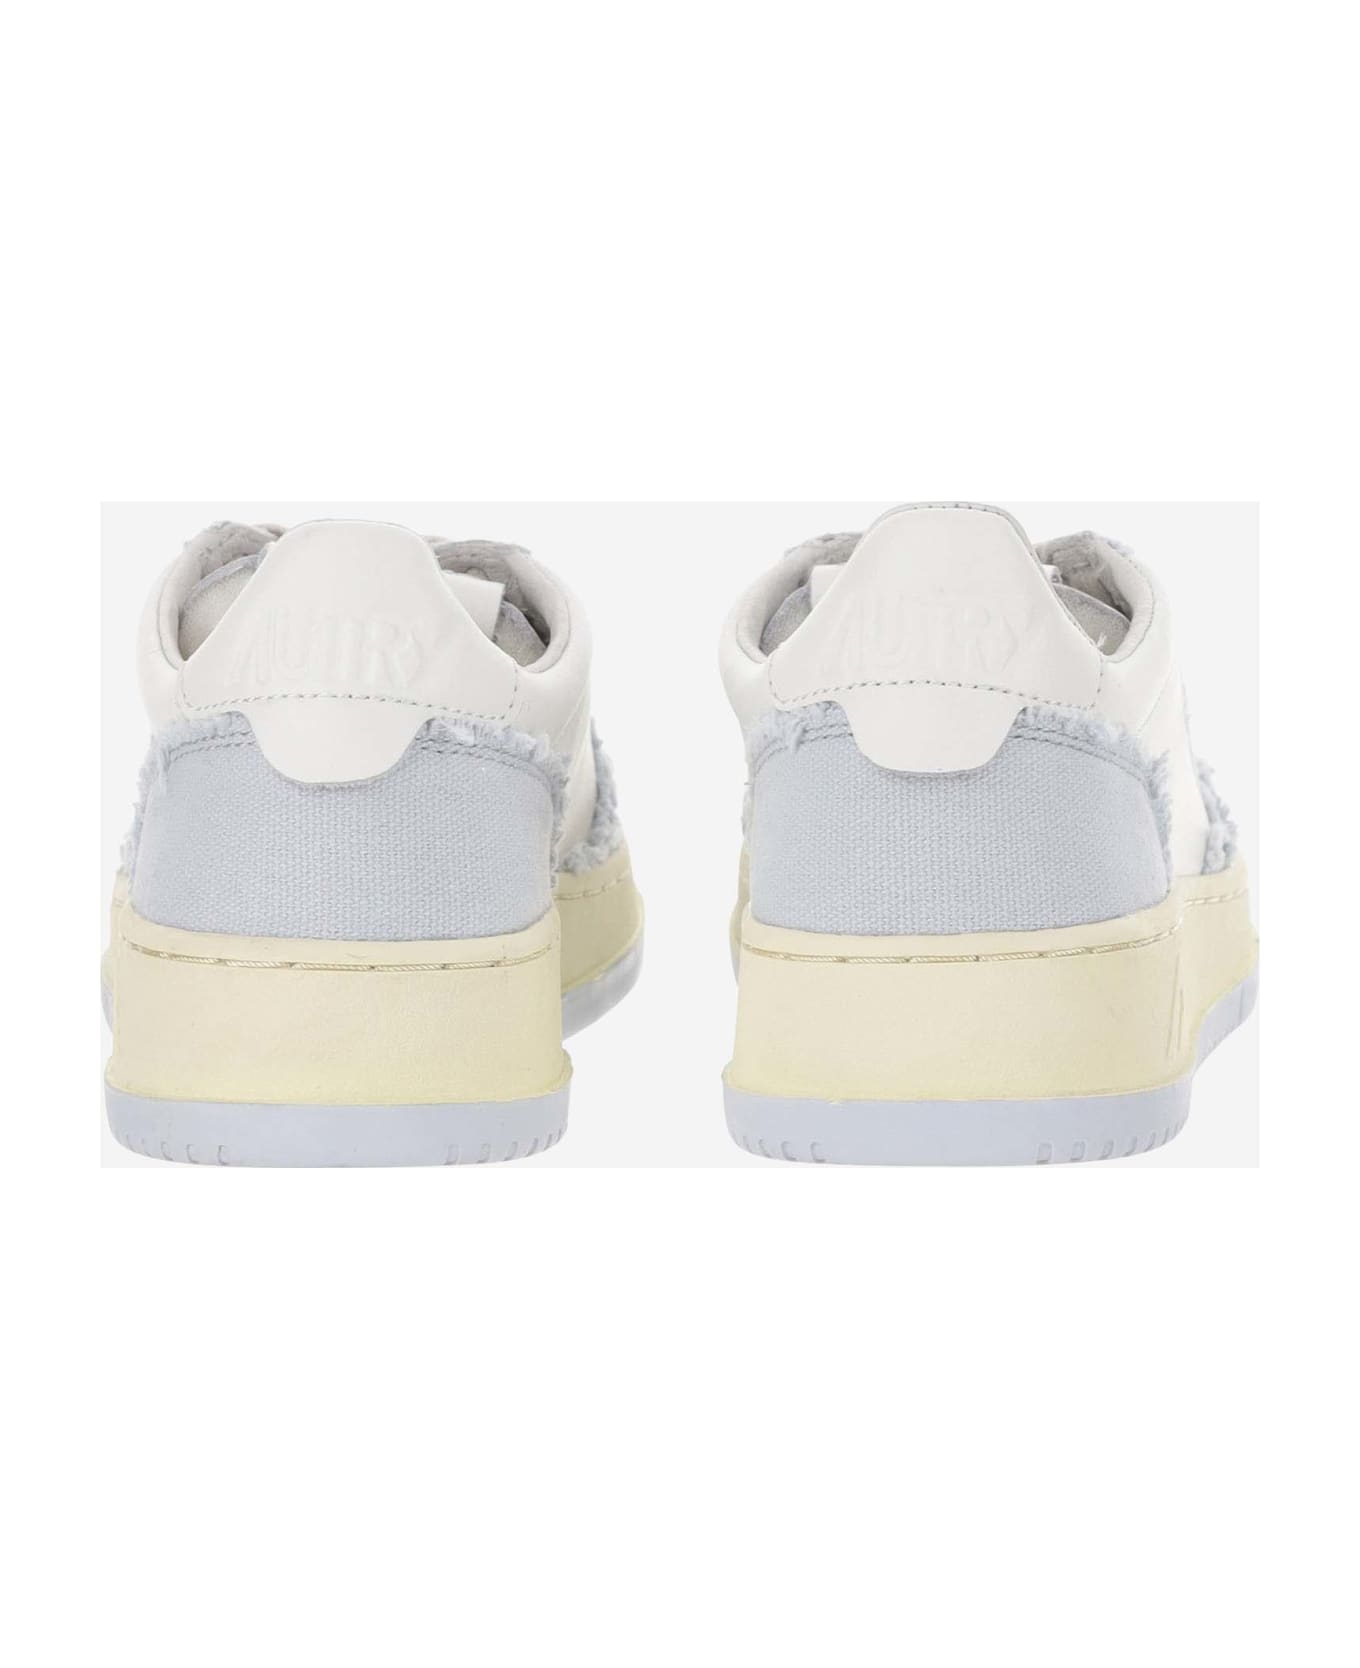 Autry Low Medalist Leather Sneakers - Grey